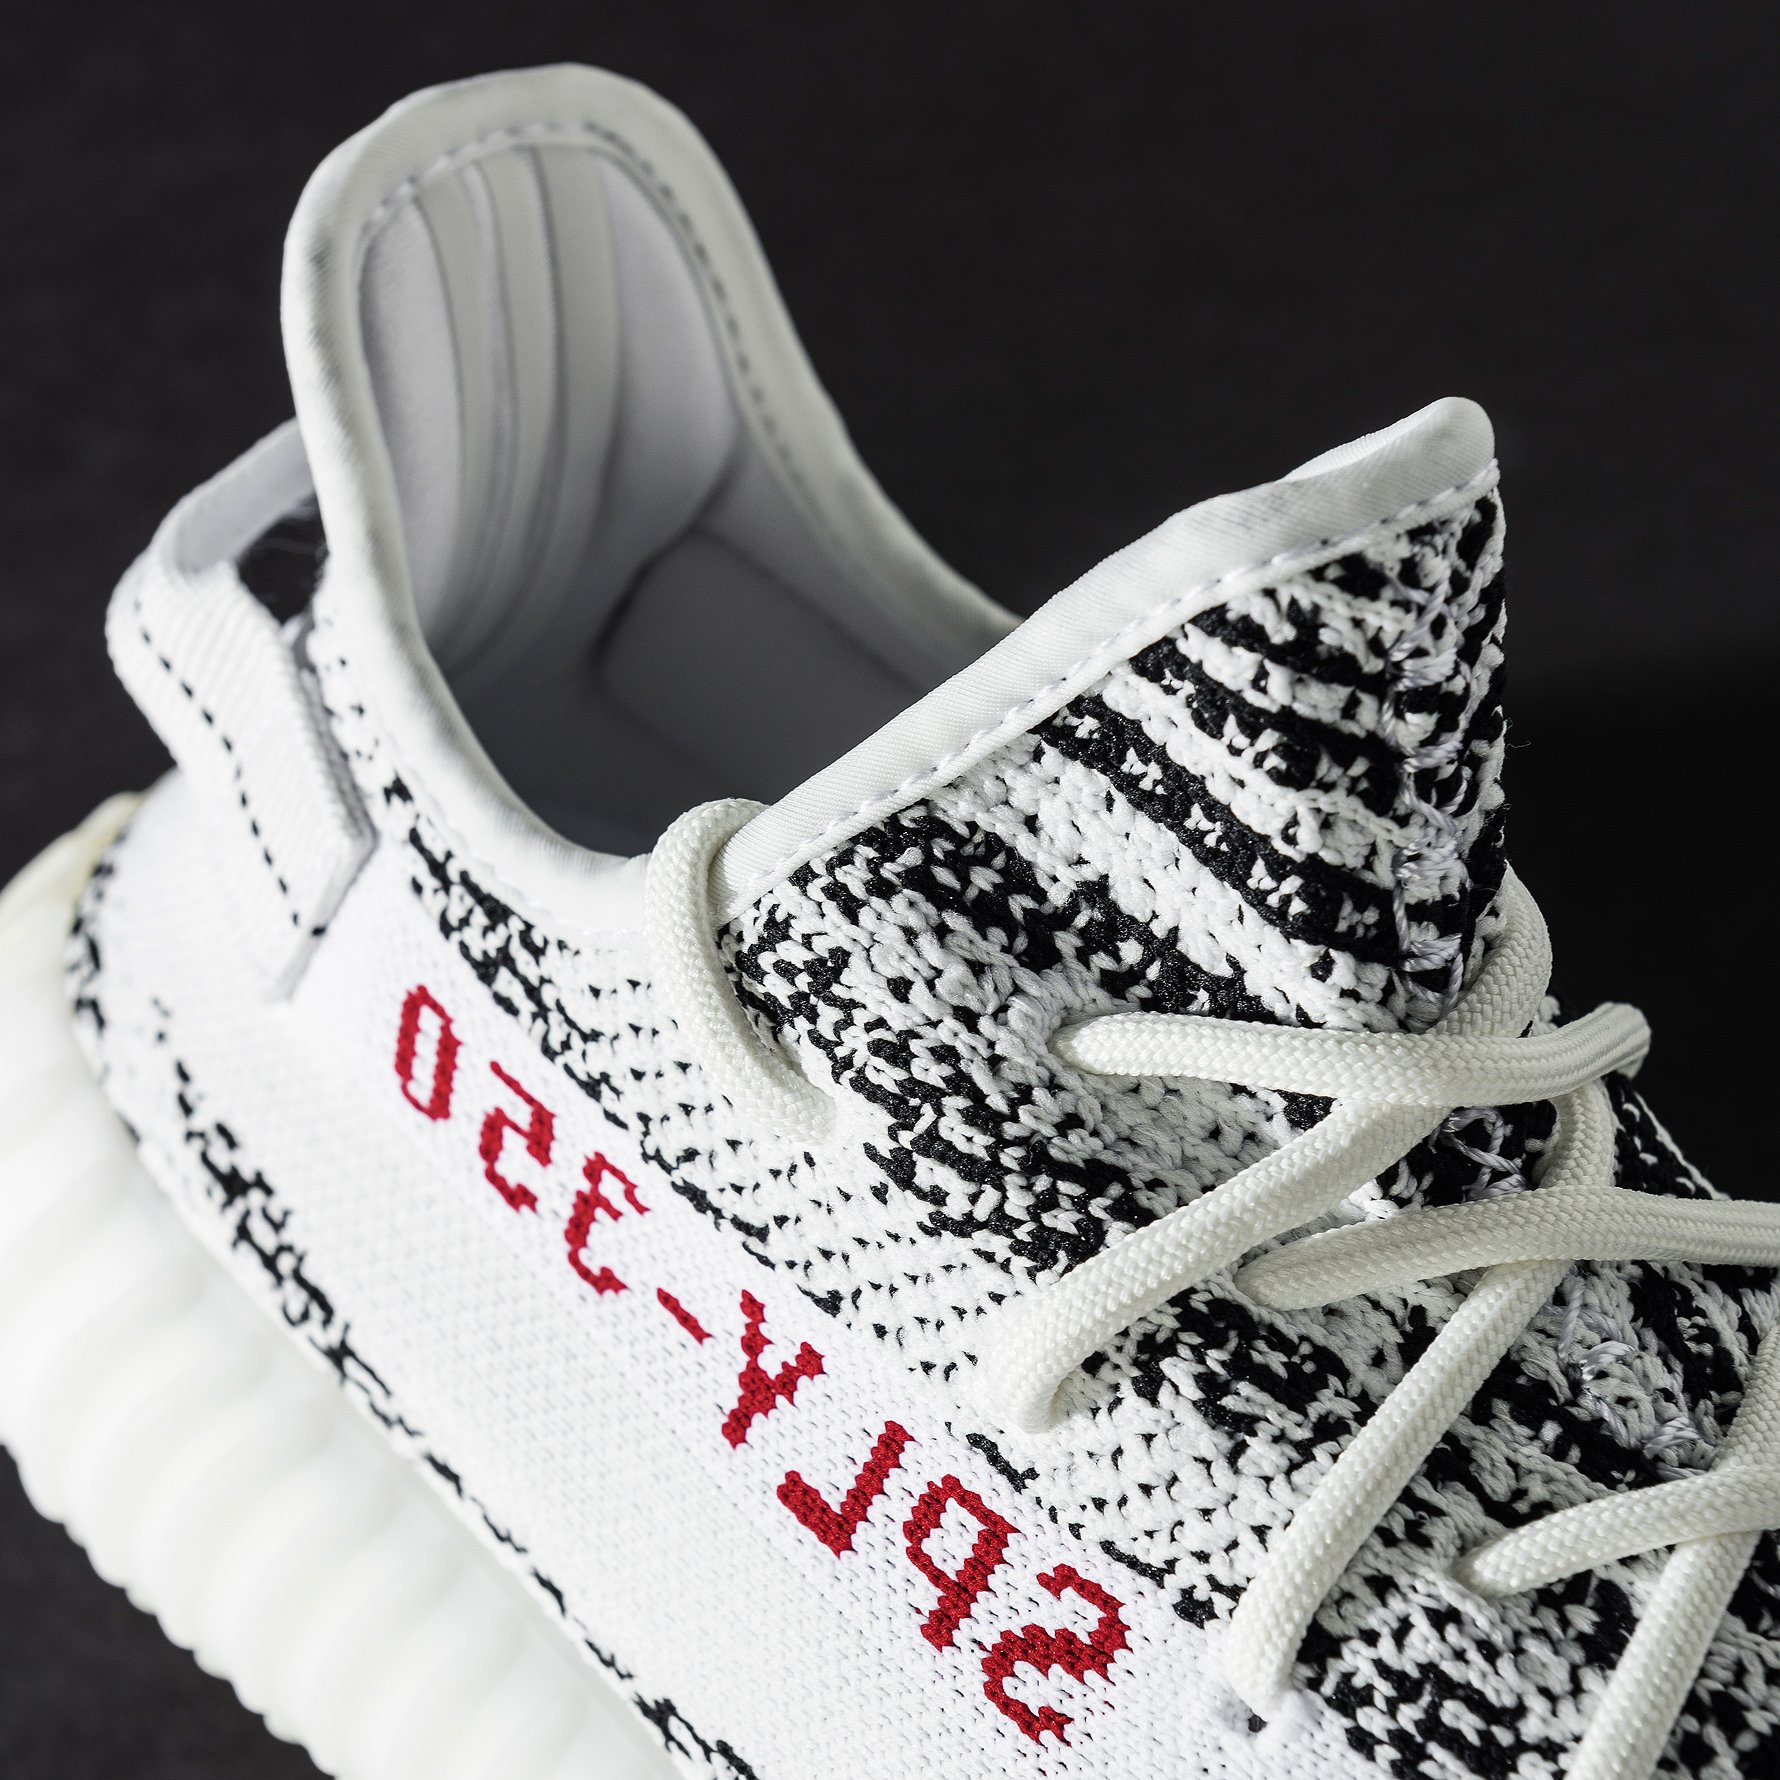 Huiswerk maken excelleren Paradox YEEZY MAFIA on Twitter: "YEEZY BOOST 350 V2 "Zebra" adidas EXCLUSIVE  Available only on https://t.co/8Gzknh7lxt and Flagships (Confirmed App)  Very Limited WW 25th Feb https://t.co/2Q7ADeYMrV" / Twitter